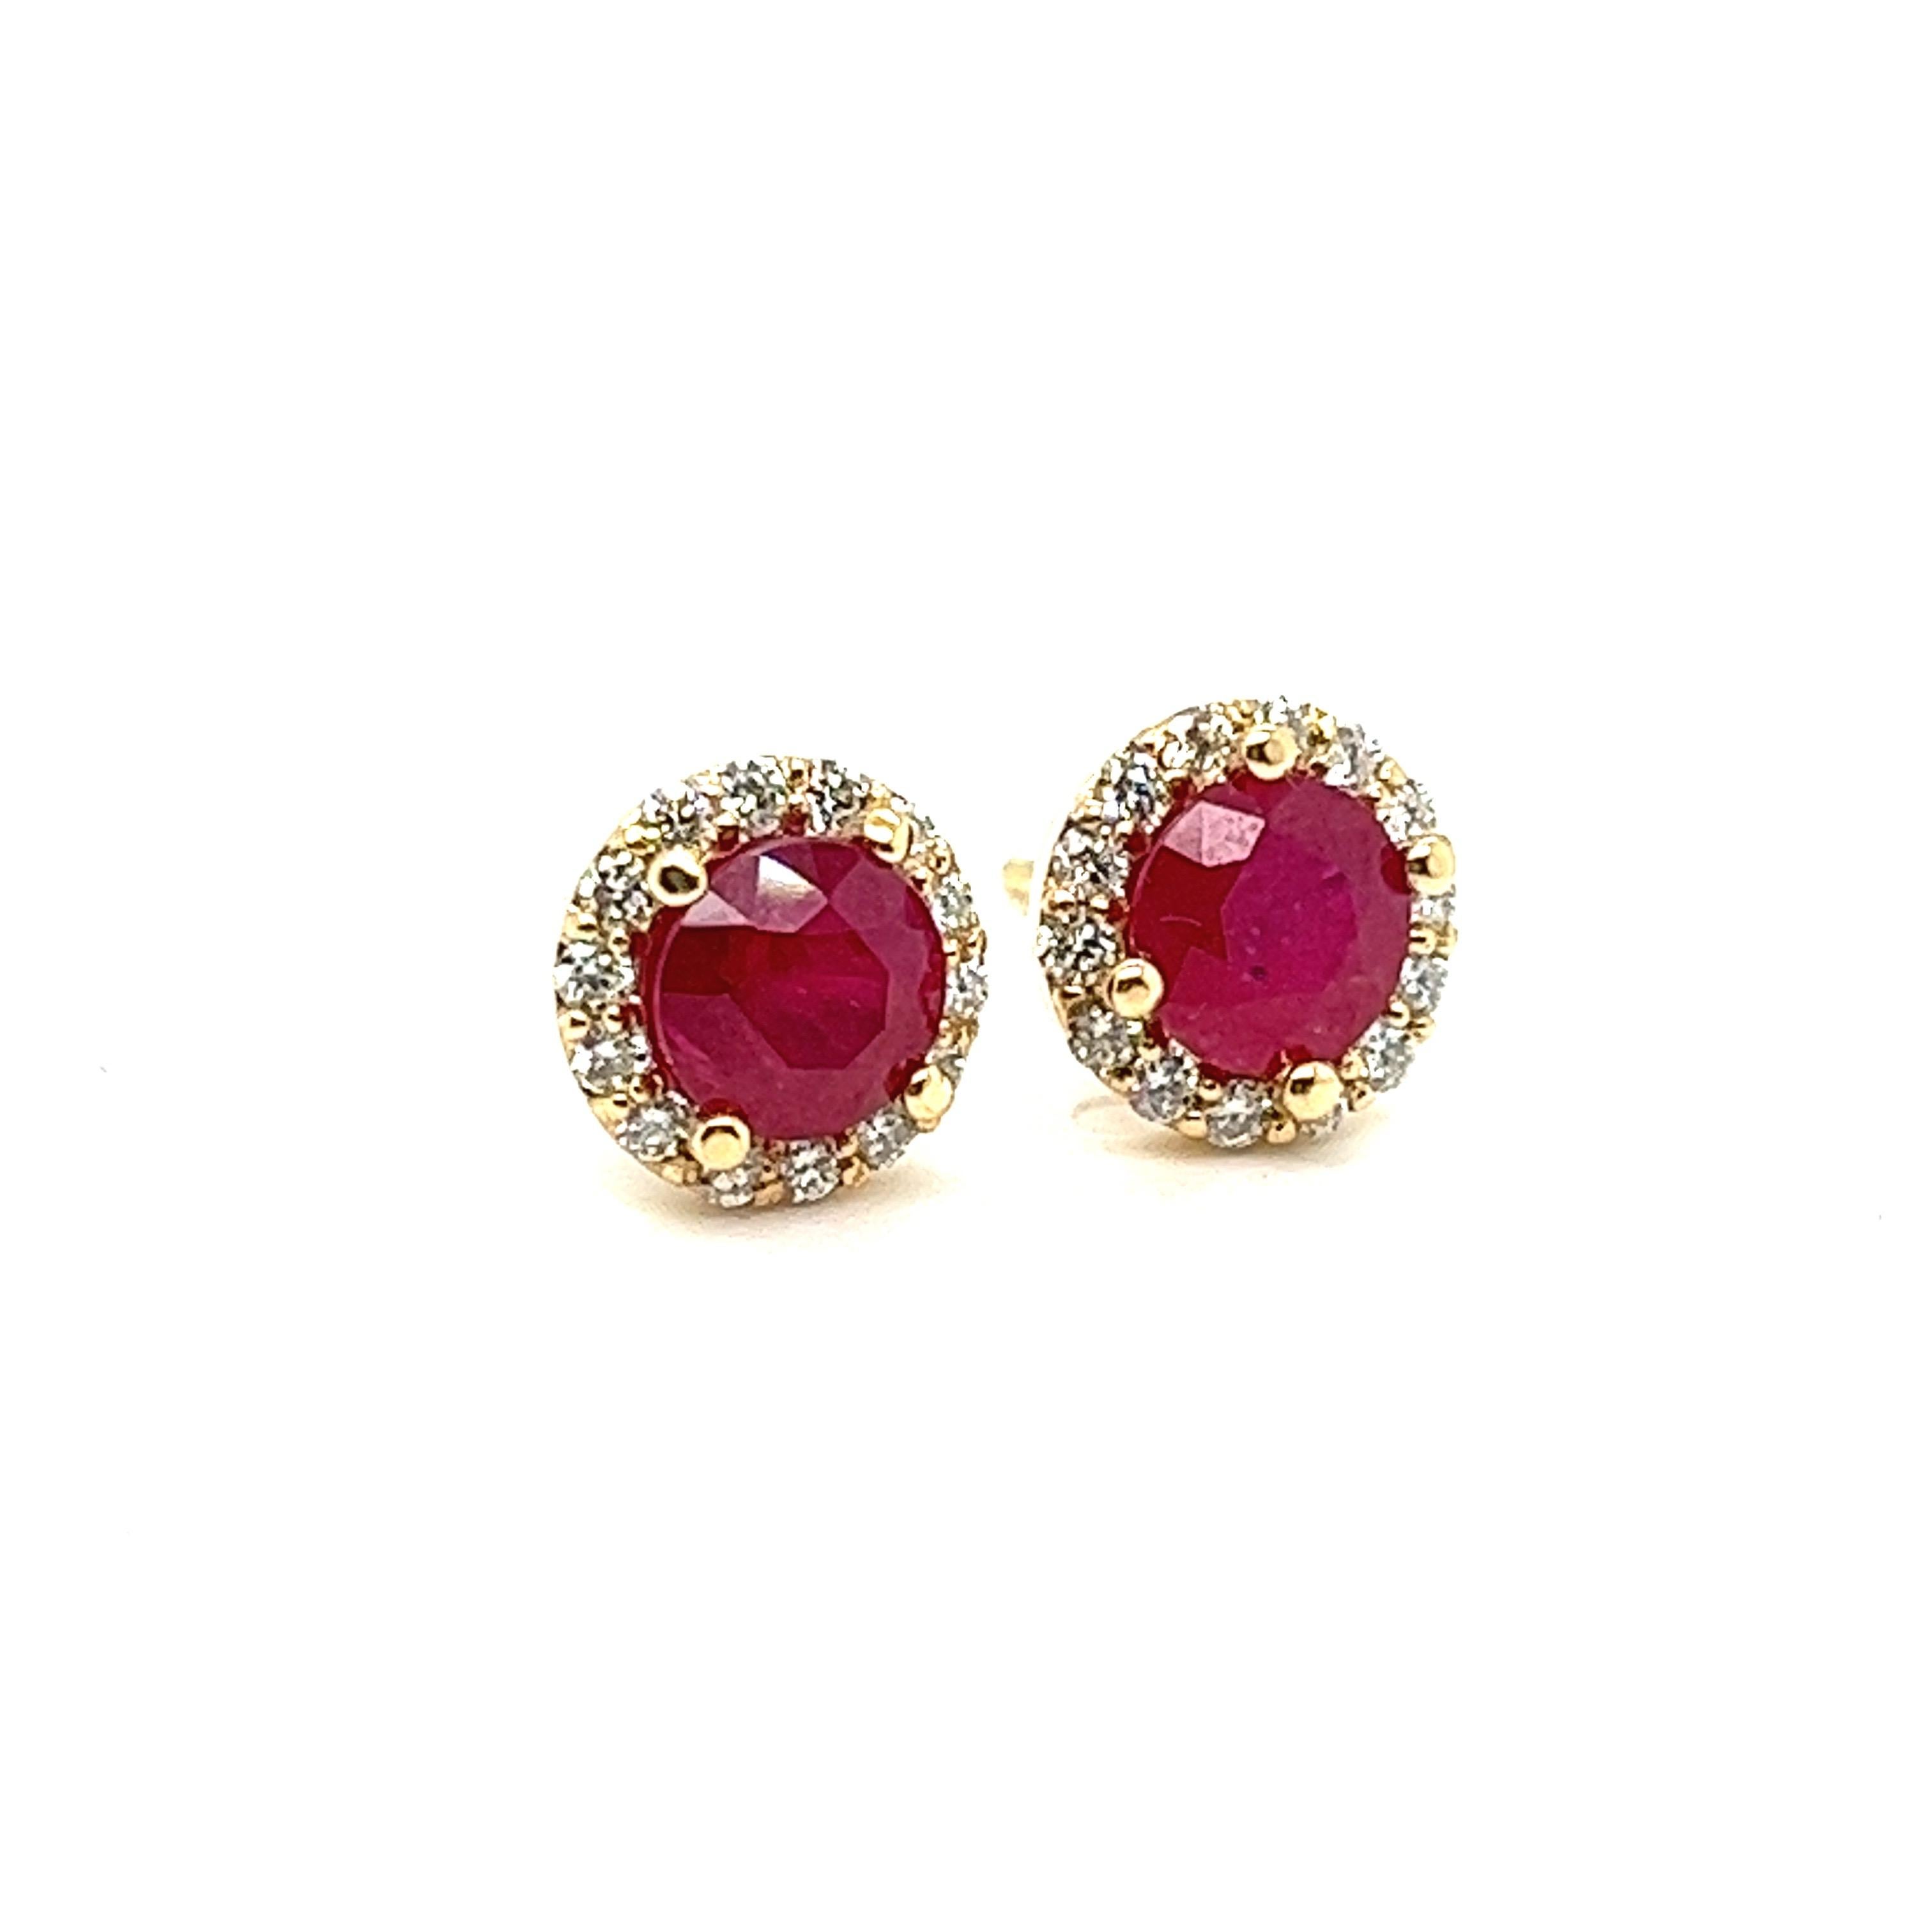 
Embark on a journey of timeless elegance with this exquisite pair of natural earth-mined red rubies, weighing a total of 2.40 carats. Set within a radiant halo of natural diamonds weighing 0.55 carats, this handmade creation in solid 18kt yellow